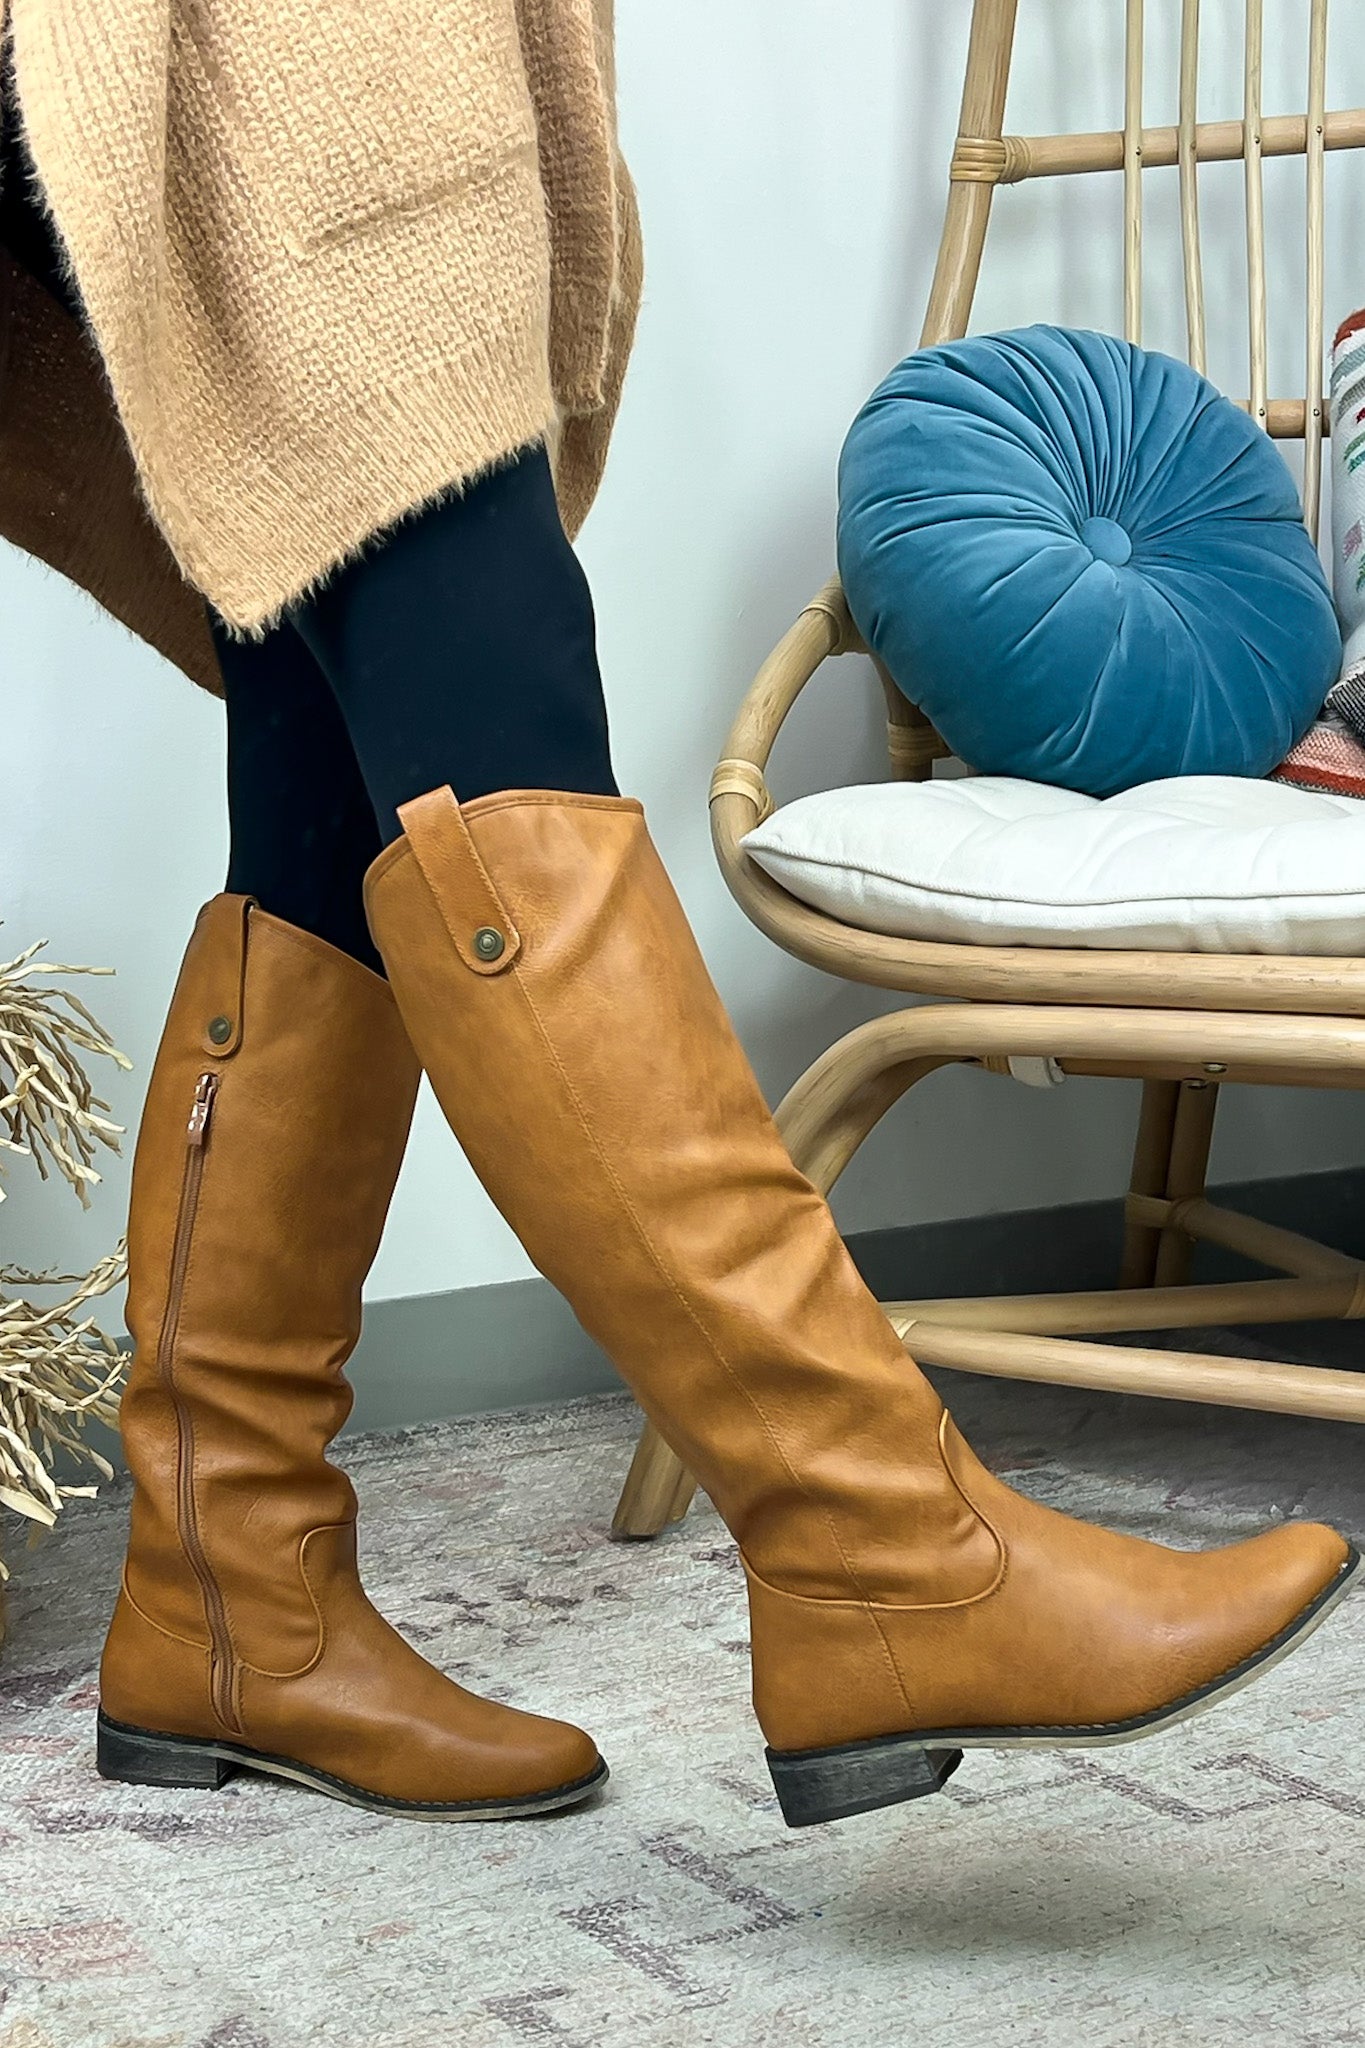 Faux Leather Tall Boots